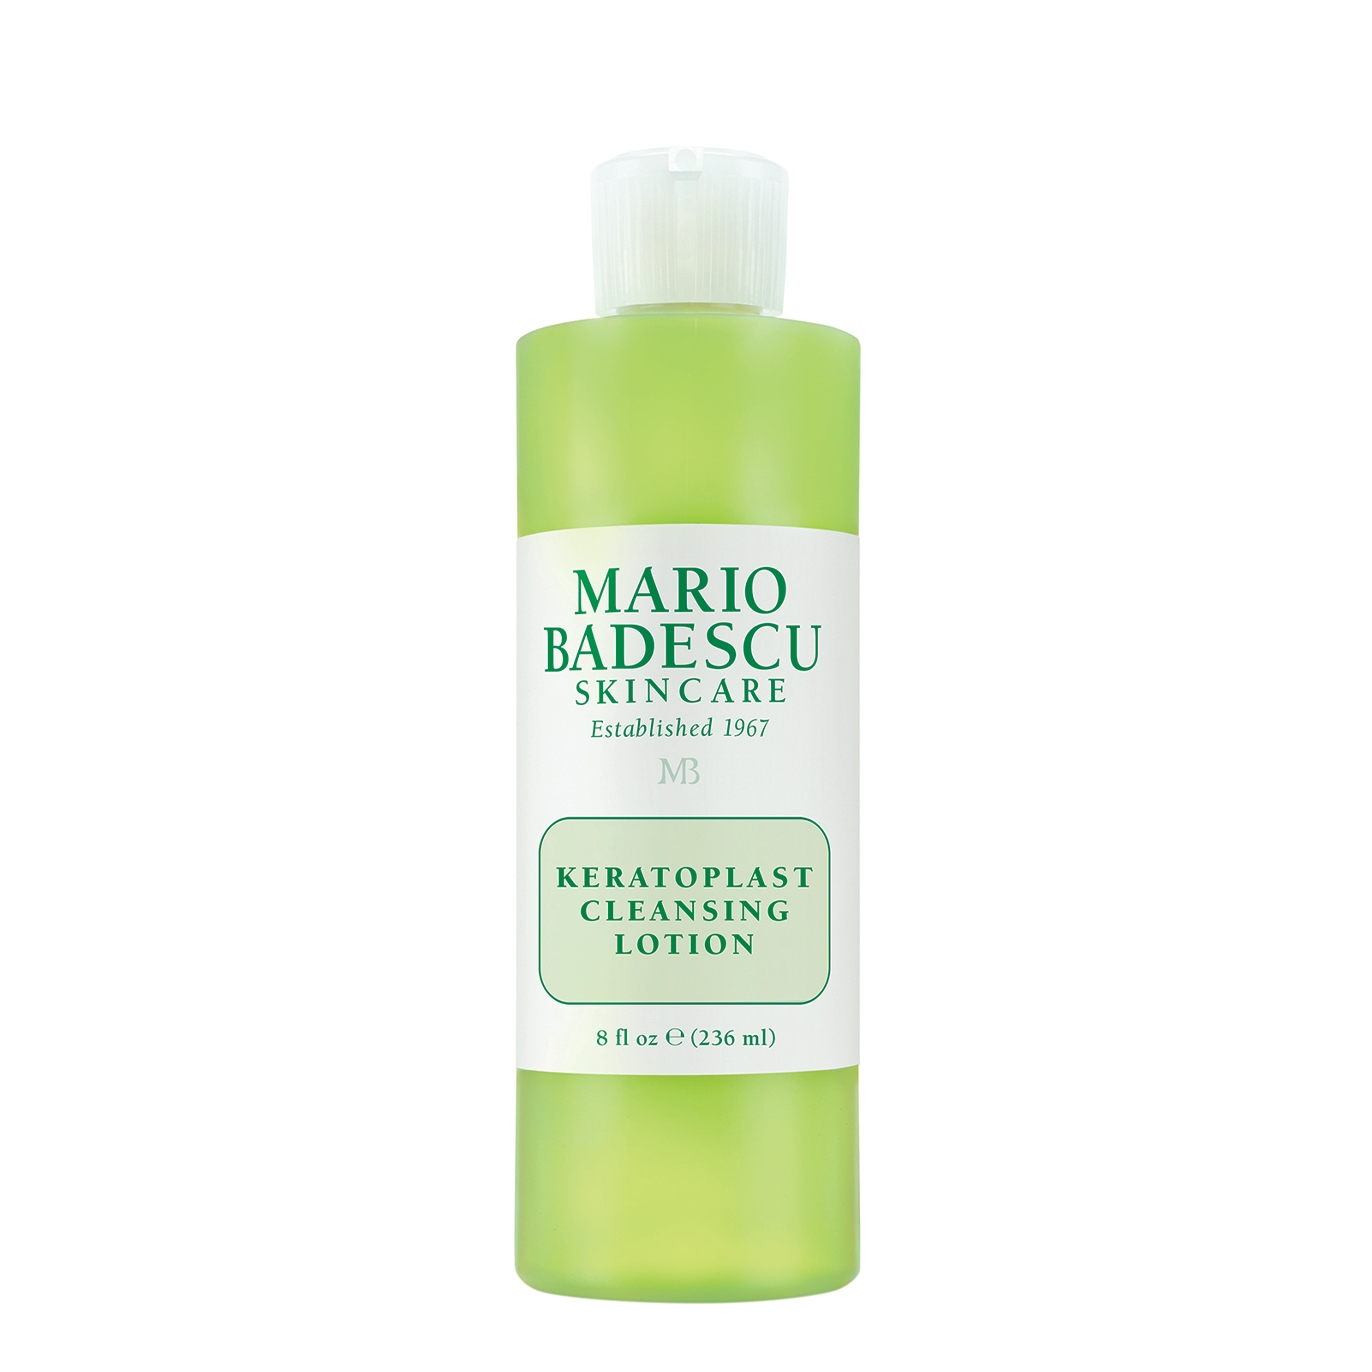 Mario Badescu Keratoplast Cleansing Lotion 236ml In White